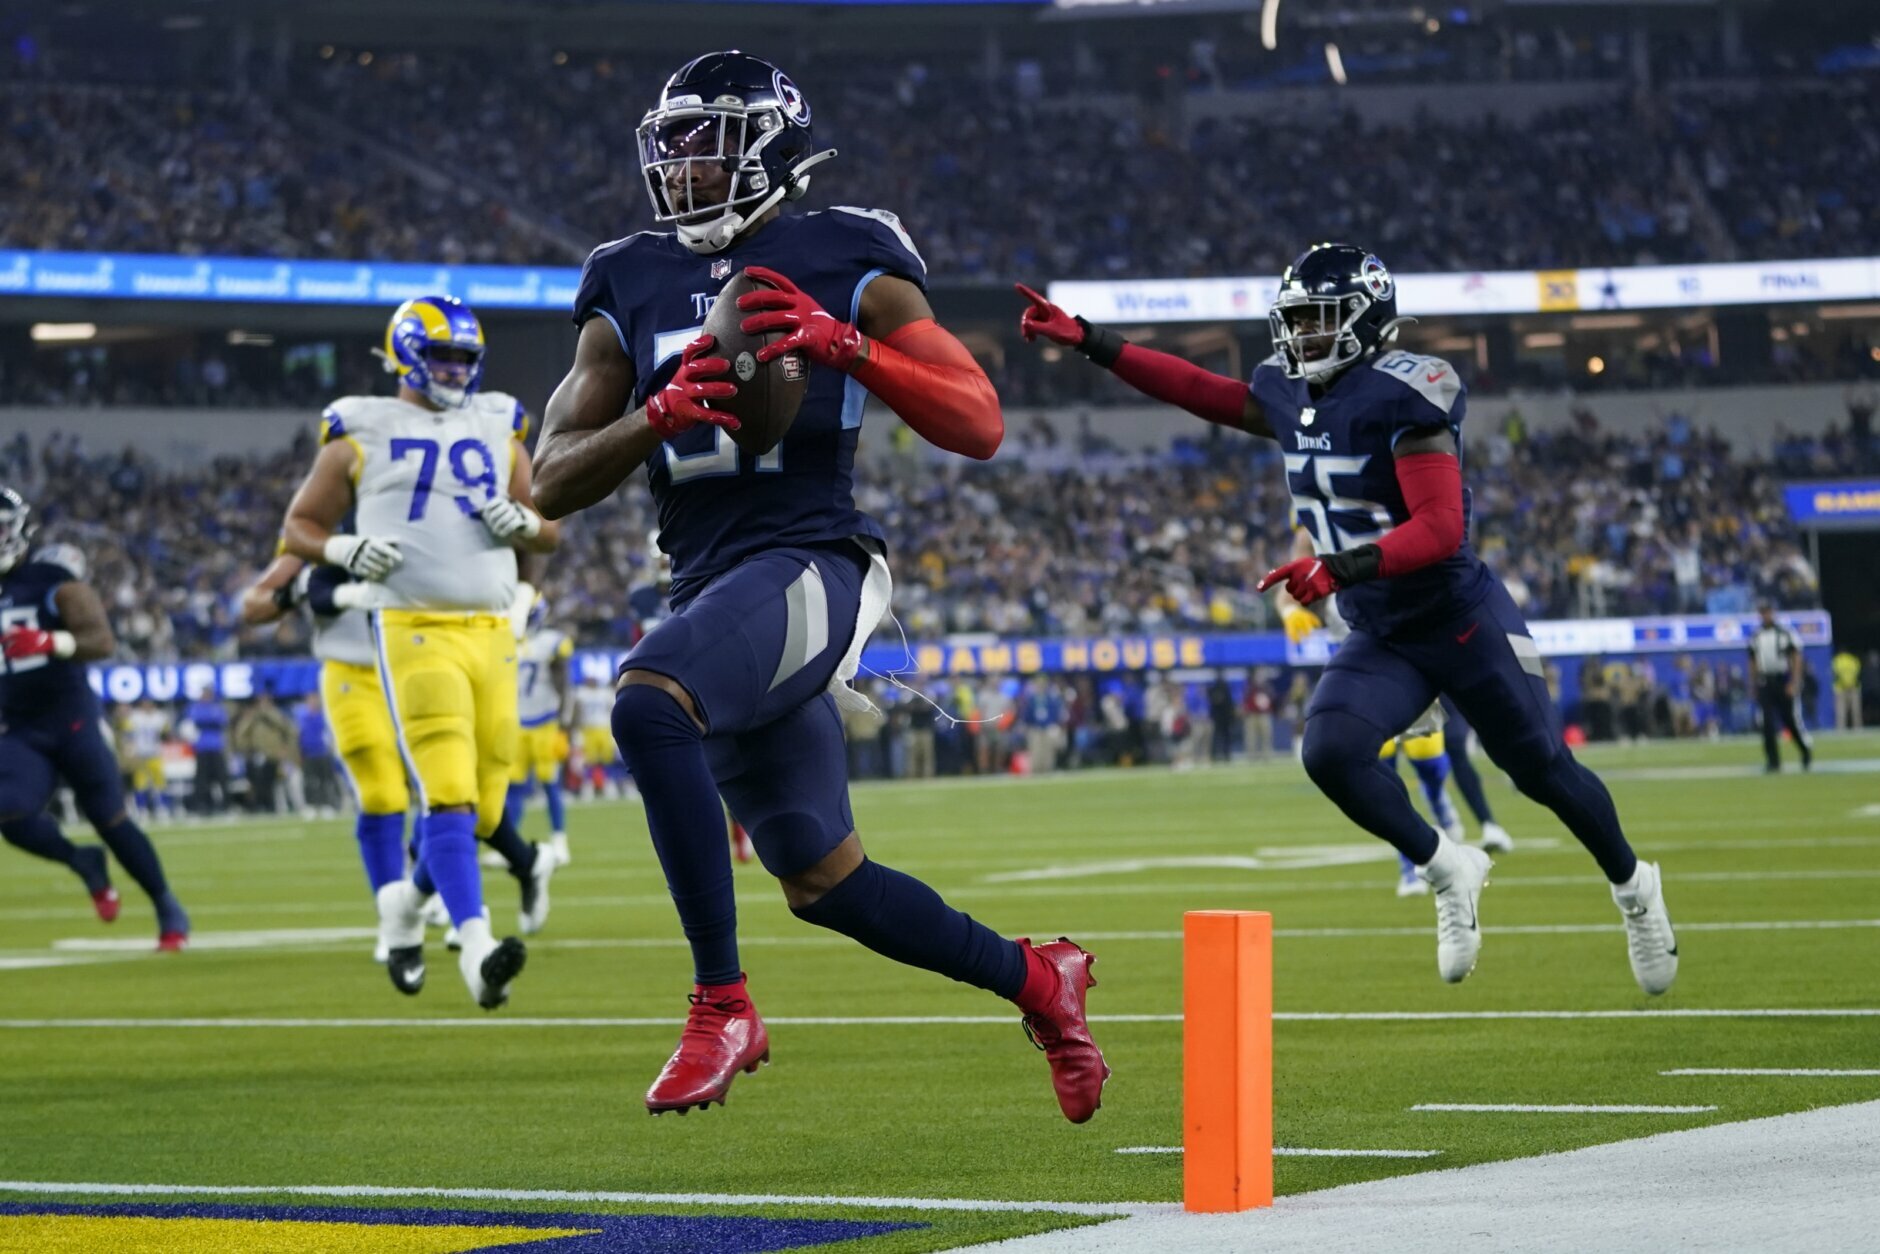 <p><b><i>Titans 28</i></b><br />
<b><i>Rams 16</i></b></p>
<p>The Titans certainly remembered 1999 because this final game of the NFL-record five Super Bowl rematches on Sunday didn&#8217;t need <a href="https://www.youtube.com/watch?v=R3eukxNnm0M" target="_blank" rel="noopener">a Mike Jones tackle at the goal line</a> — this was a straight up domination in which Tennessee&#8217;s defense announced loud and clear it just might be championship-worthy after all.</p>
<p>And I gotta ask, Los Angeles — <a href="https://twitter.com/RobWoodfork/status/1455230345150967820?s=20">is the ghost of George Allen running the Rams</a>? This 2000s Dan Snyder-esque disregard for draft picks and obsession with acquiring big-name veterans only ends in disappointment.</p>
